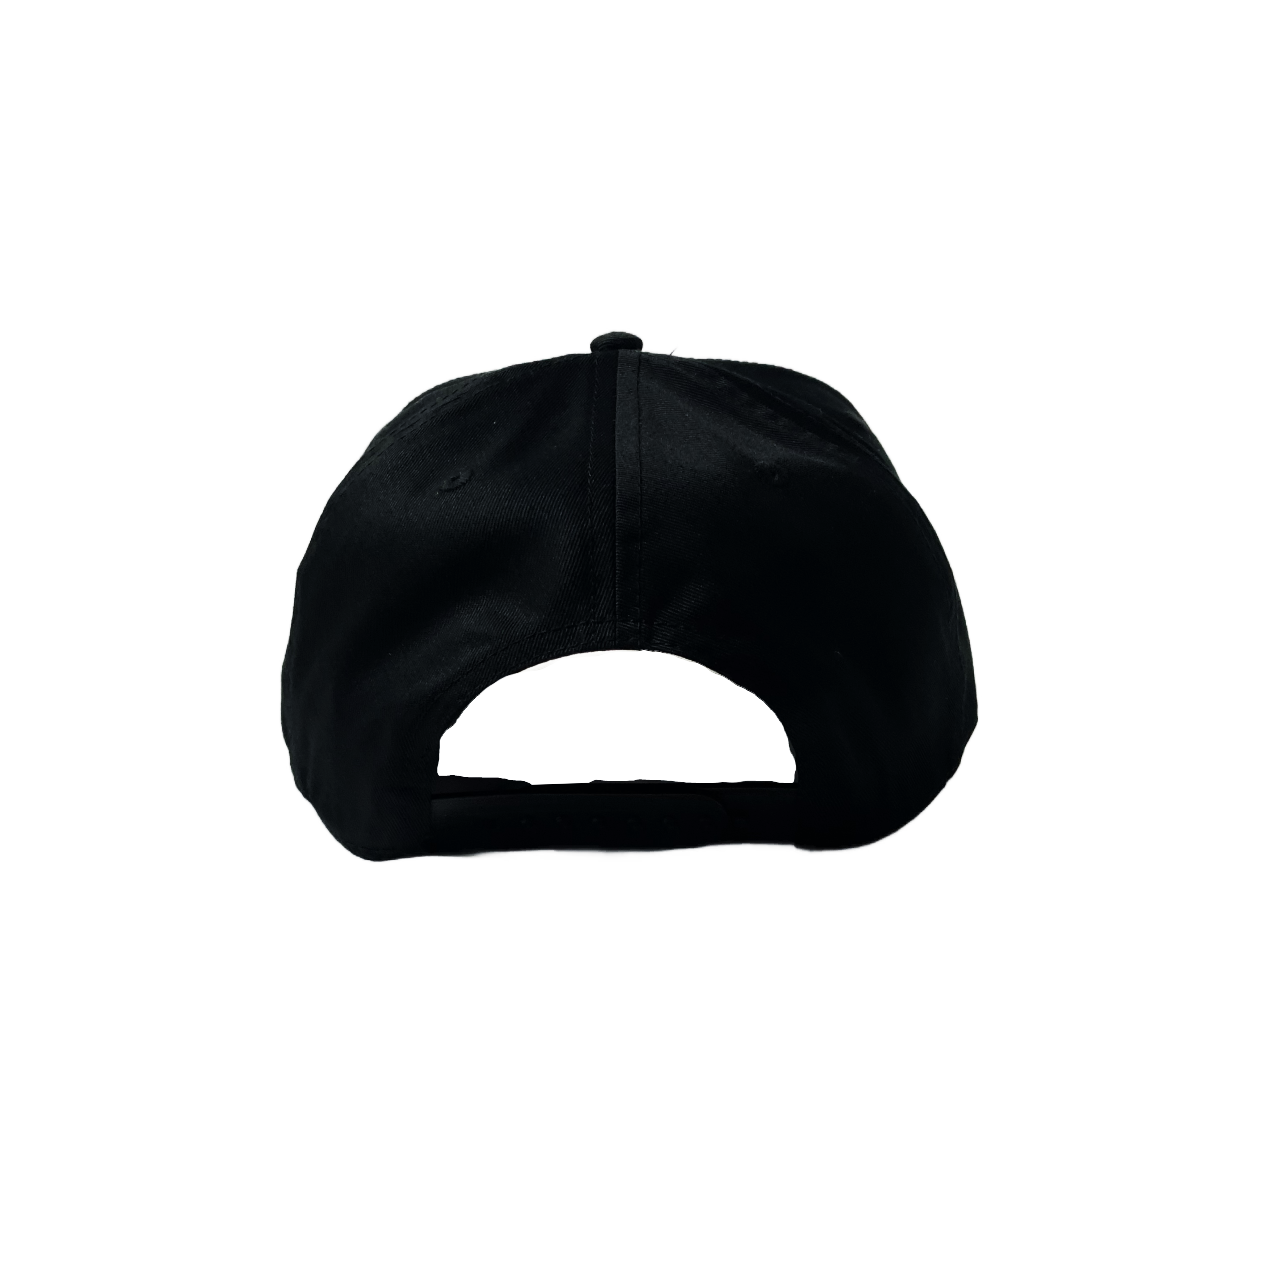 VCTRY Logo 5 Panel hat - Black and Gold